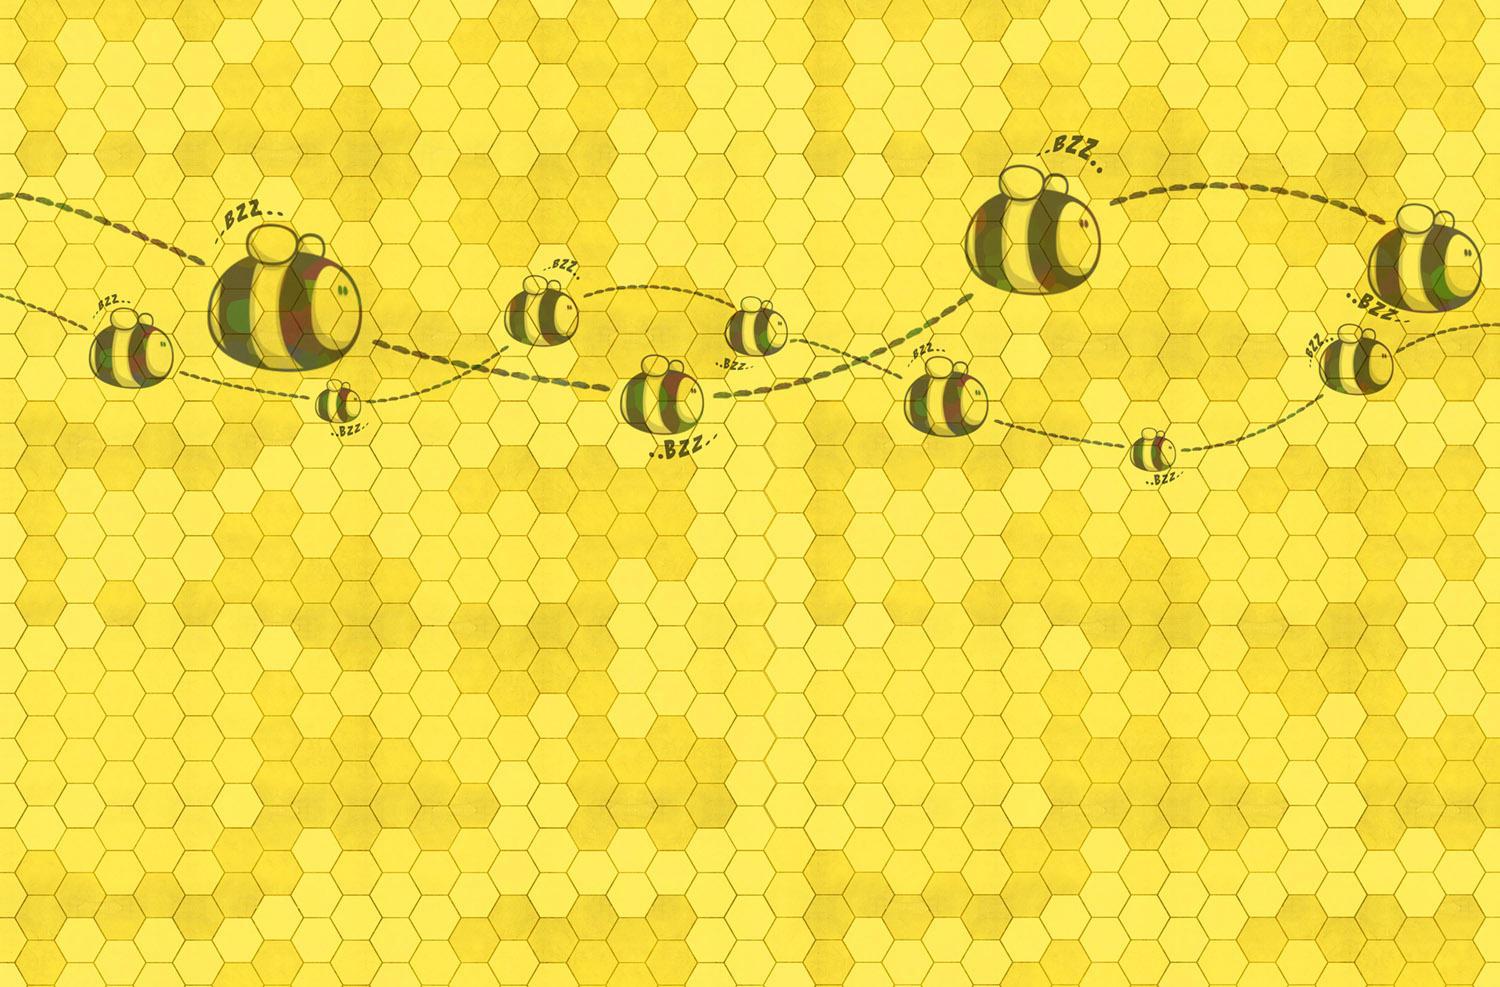 A yellow background with bees flying around - Bee, honey